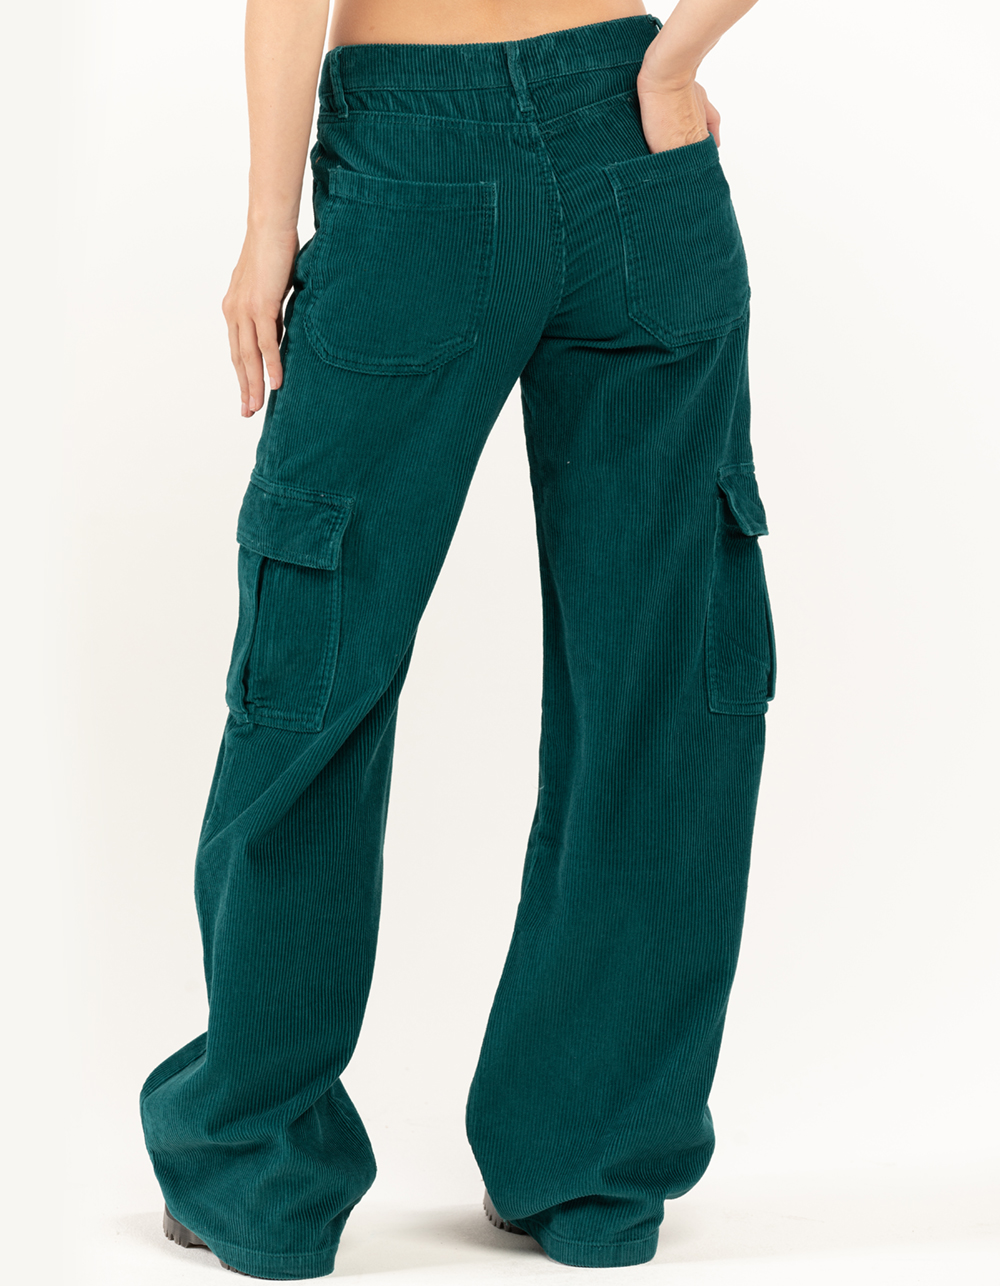 RSQ Womens Low Rise Cargo Corduroy Puddle Pants - DK GREEN